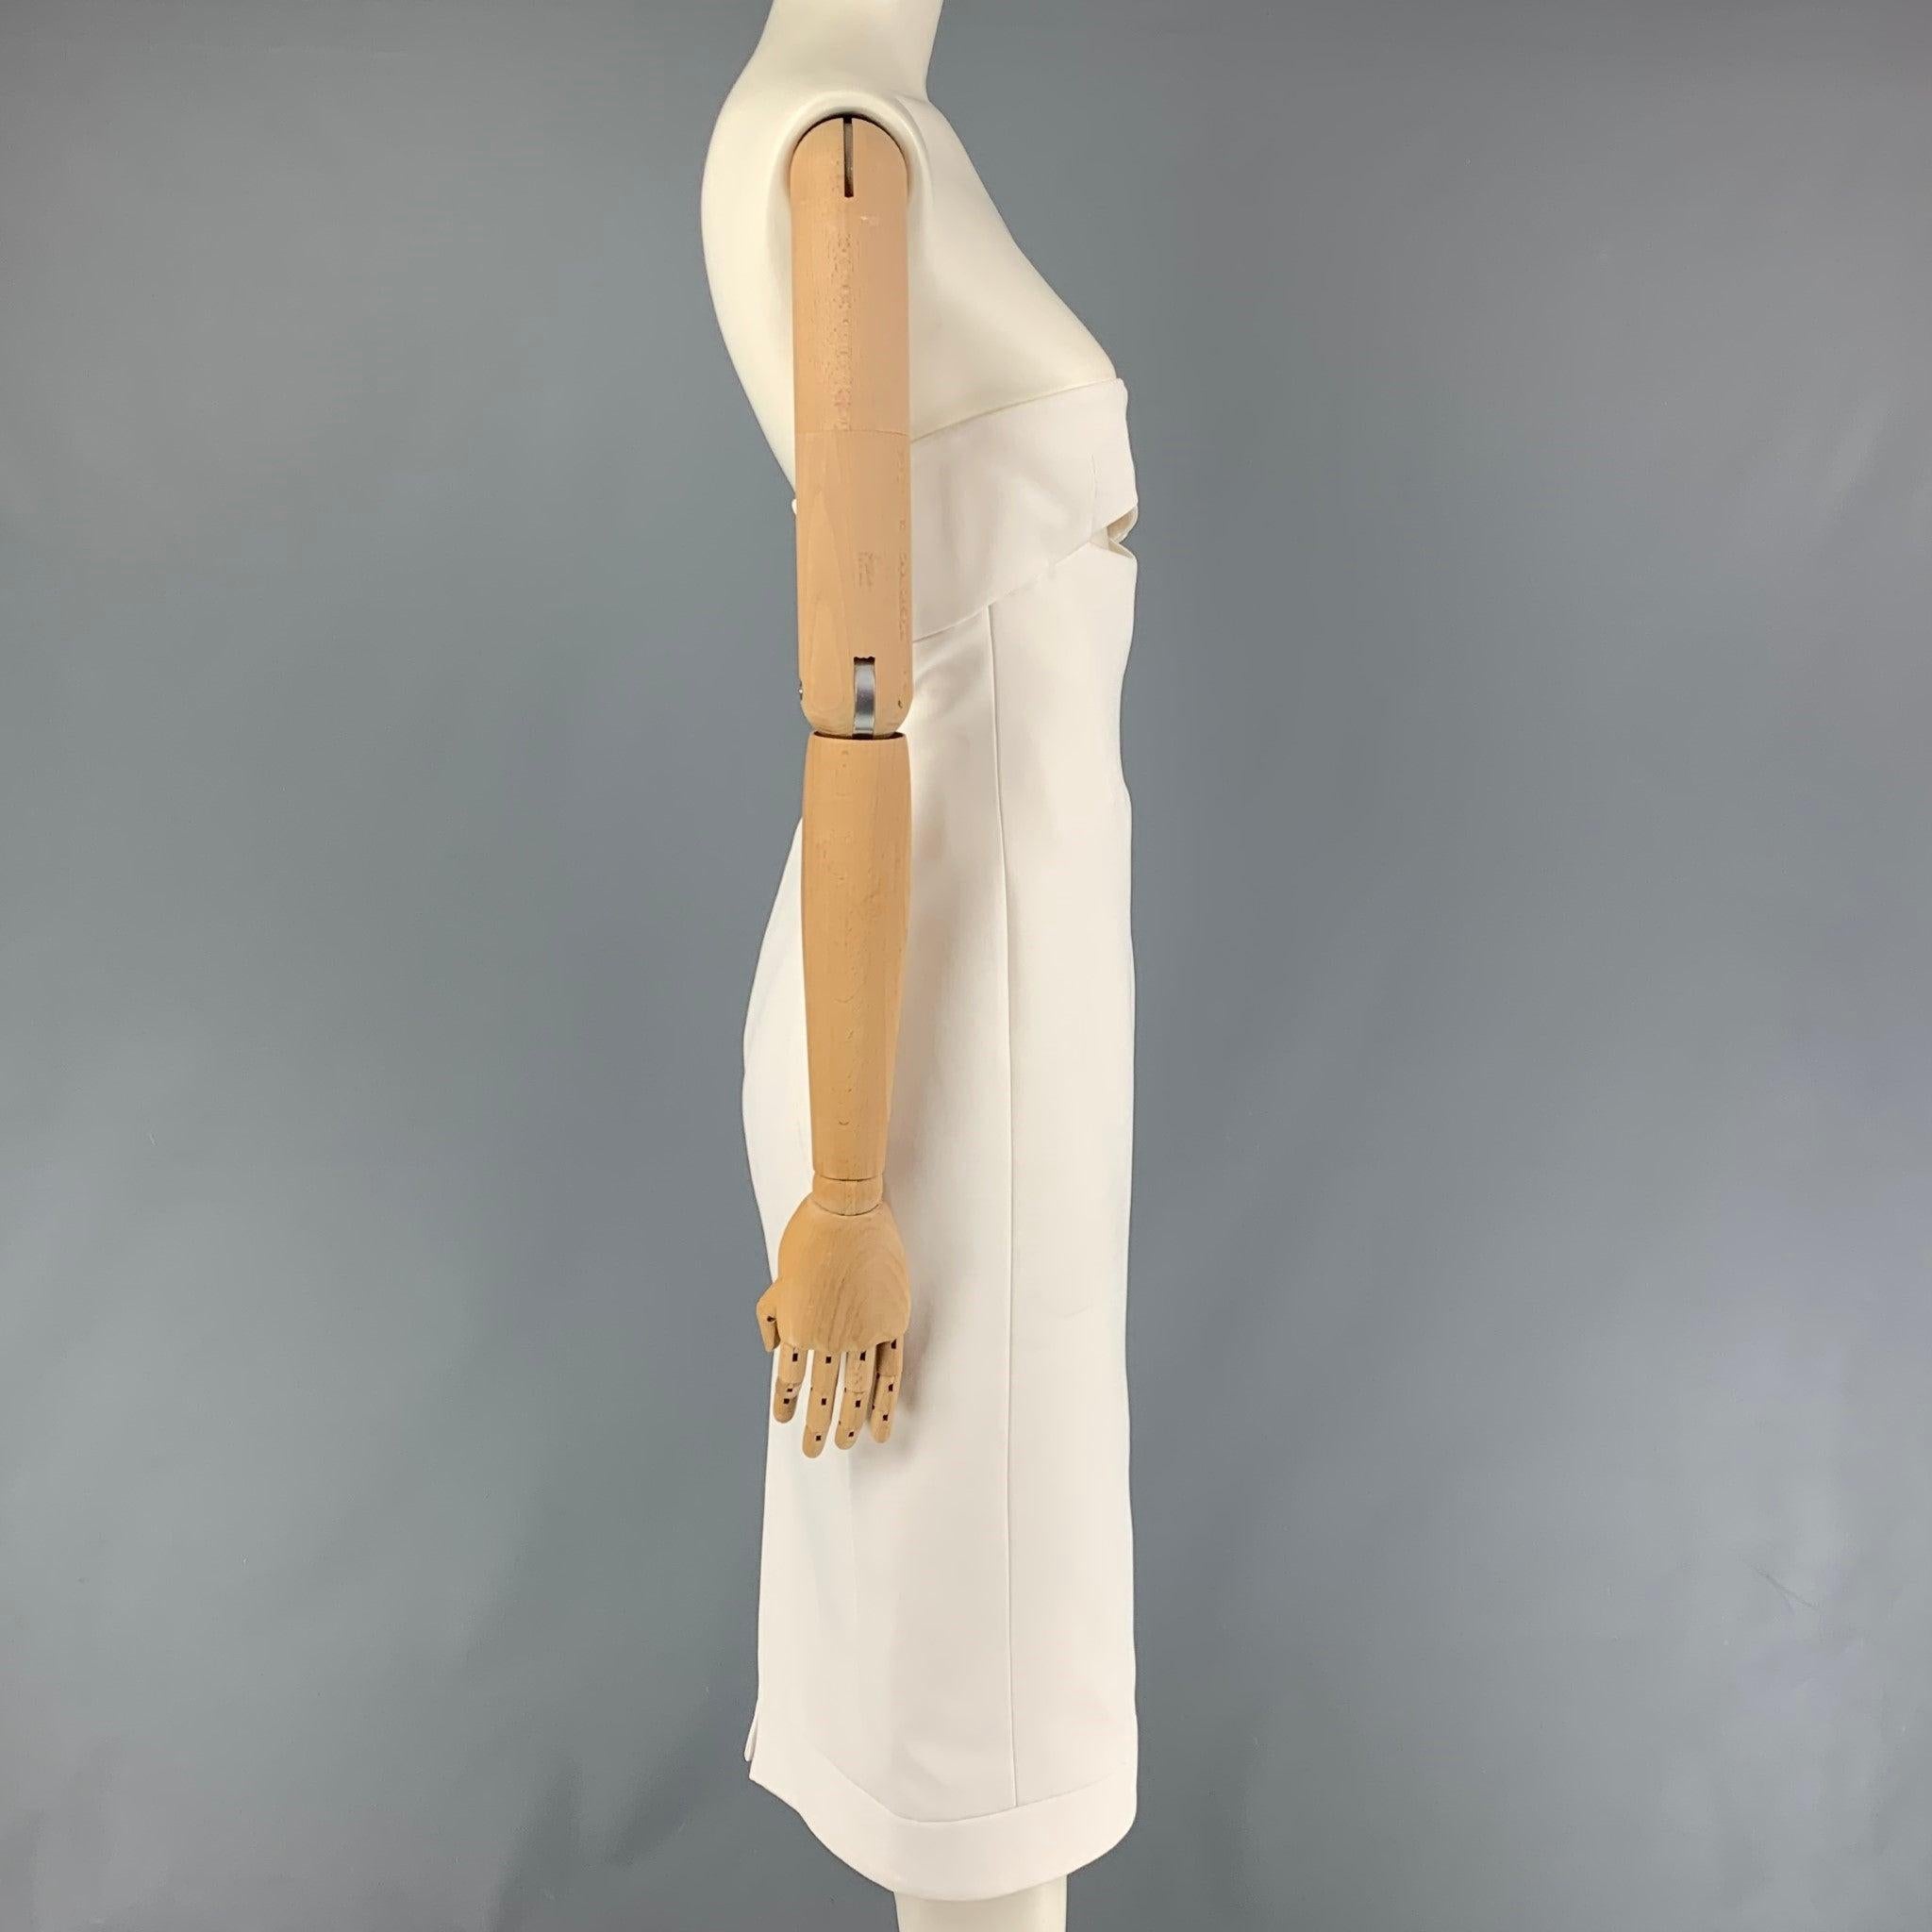 SAINT LAURENT cocktail dress comes in a white viscose featuring a cutout front, strapless neckline, vented back, midi length, and a back zip up closure. Made in Italy.
Very Good
Pre-Owned Condition. 

Marked:   F 36 

Measurements: 
  Bust:
26